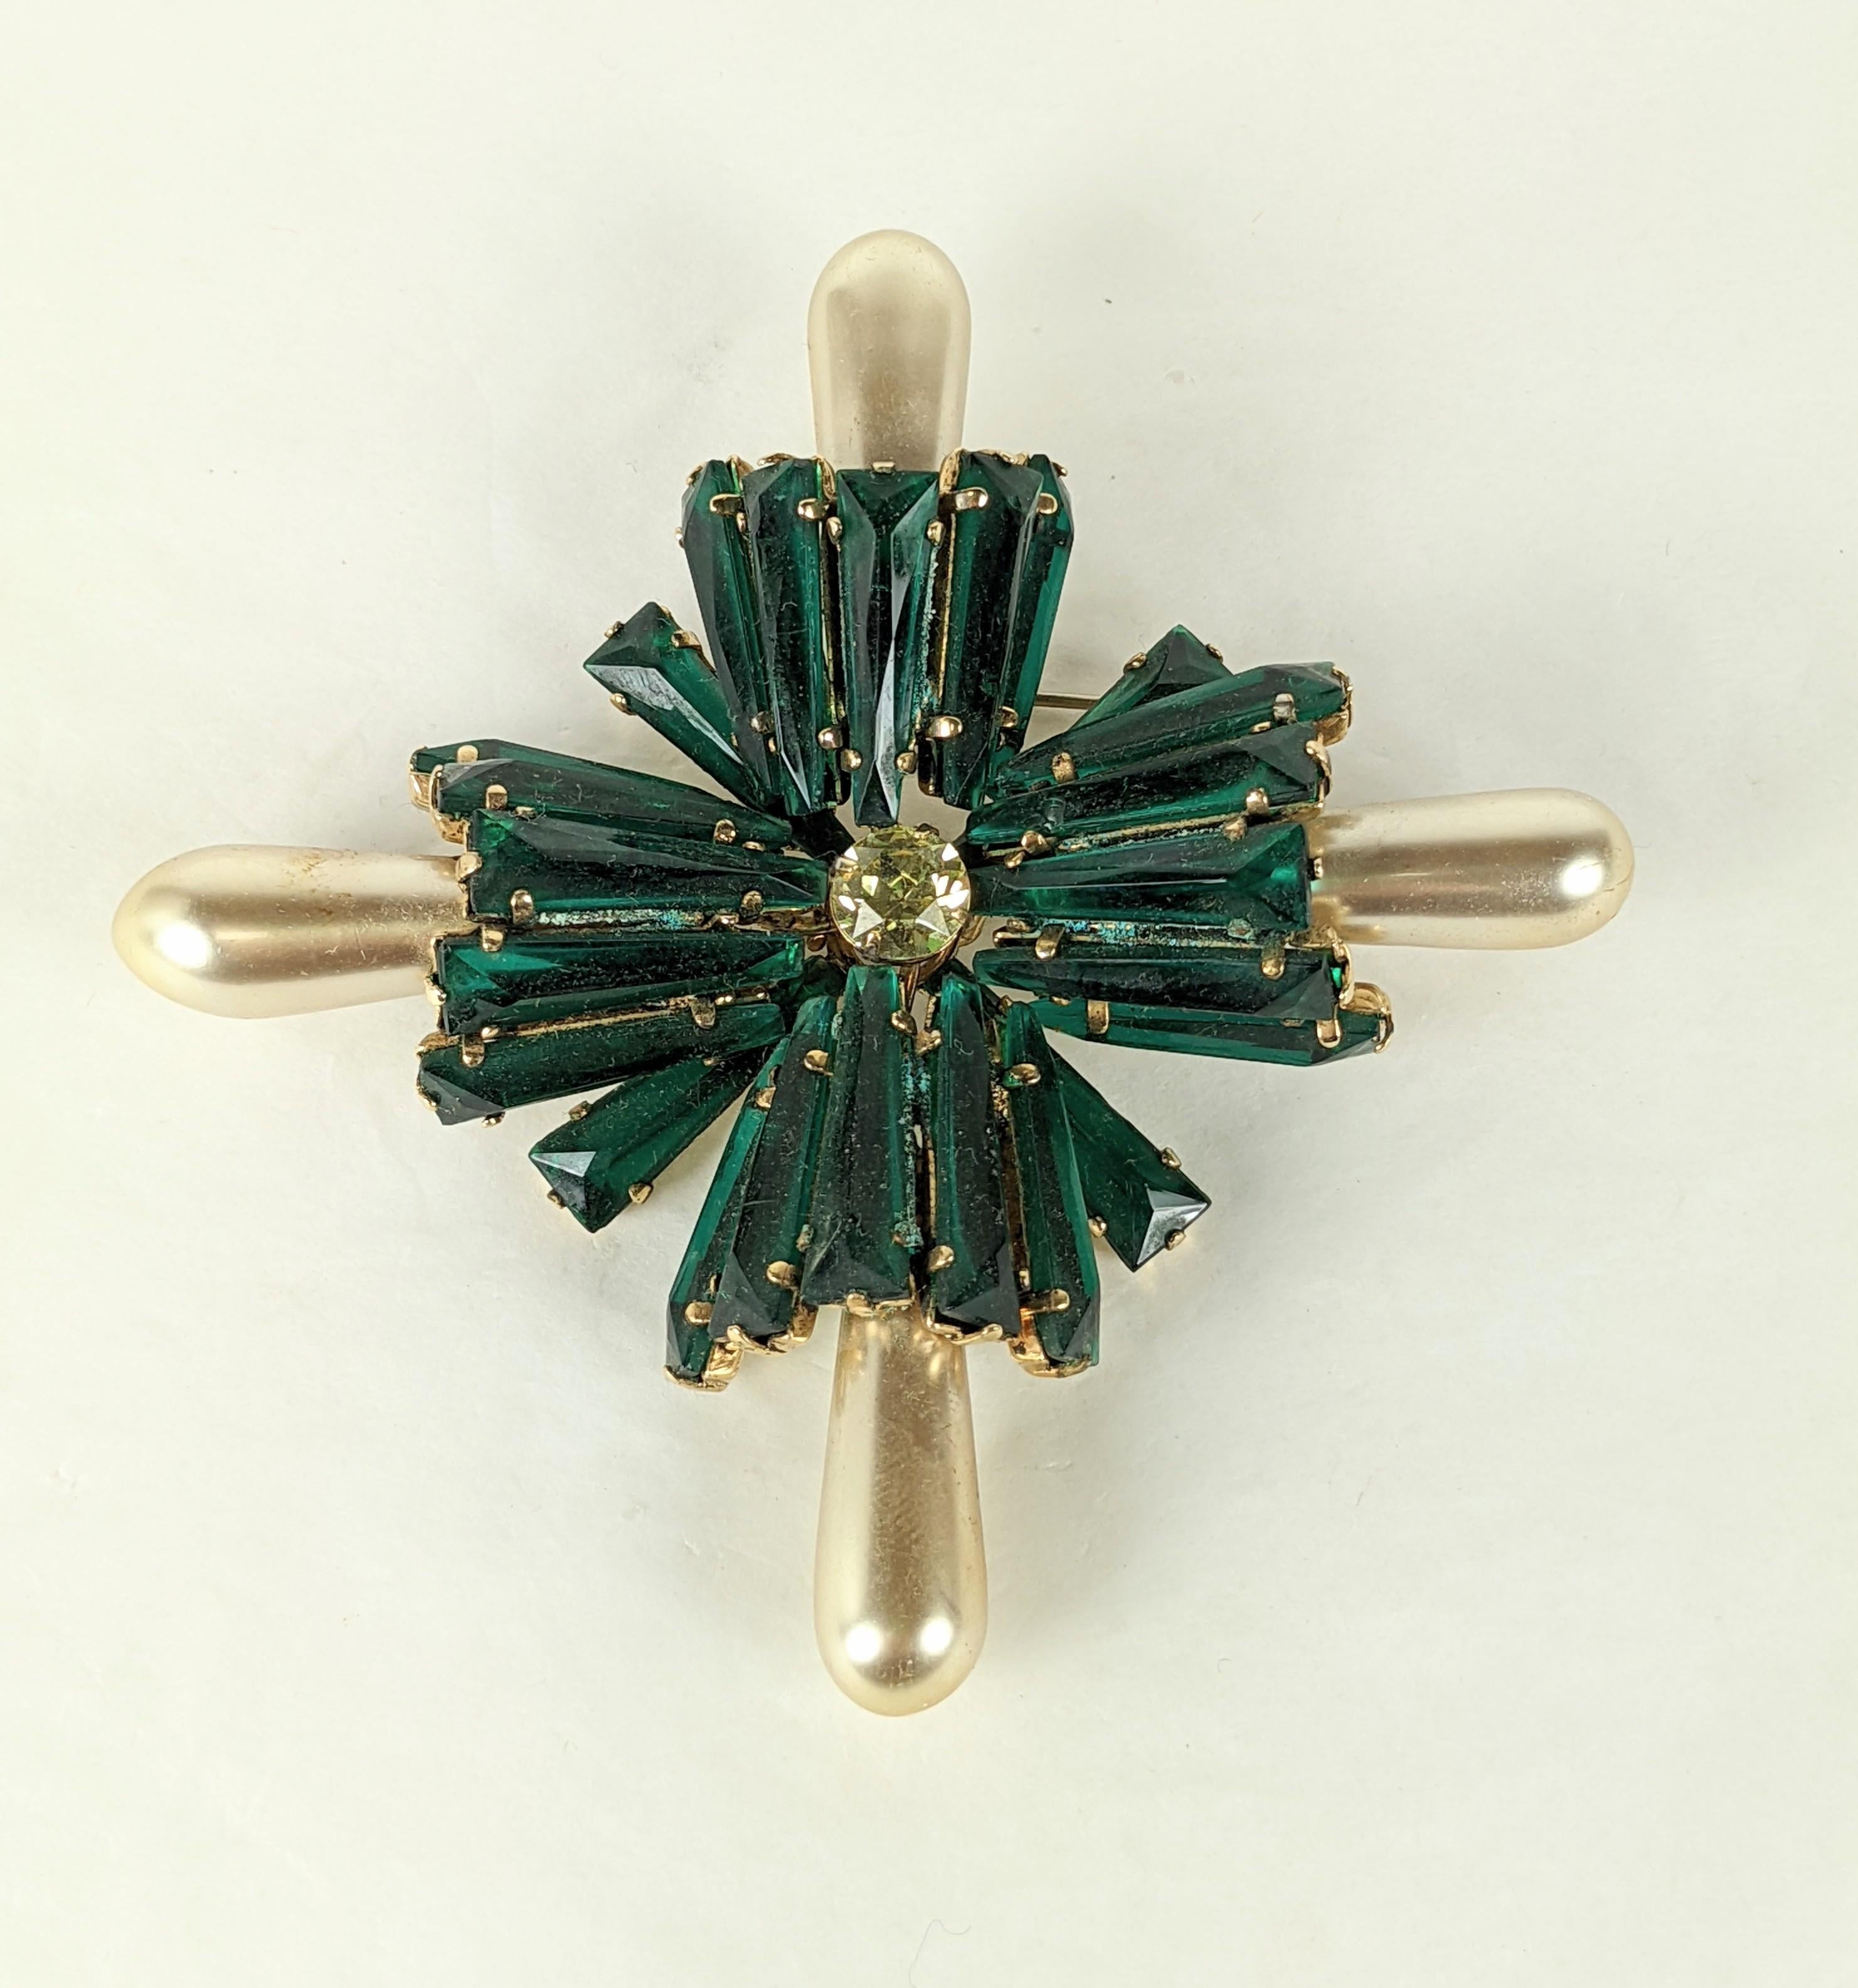 Rarest Schreiner Ruffle series Maltese cross brooch. Of staggered rows of signature inverted and tapered emerald keystone rectangle ruffle stones. Center brillant cut citrine and four large l elongated teardrop faux pearls forming the body of the